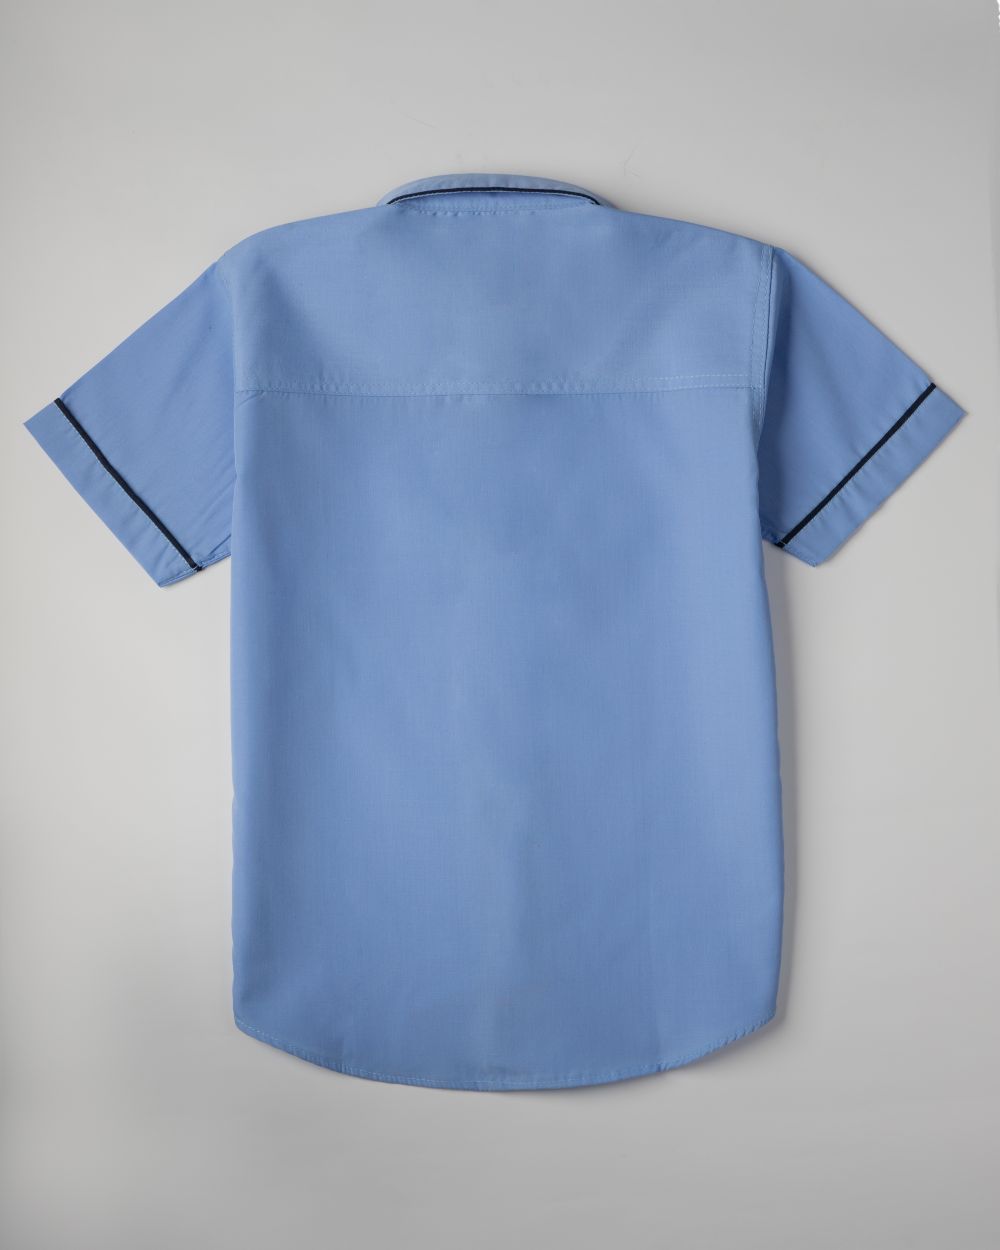 AZURE BLUE SHIRT WITH NAVY BLUE PIPPING